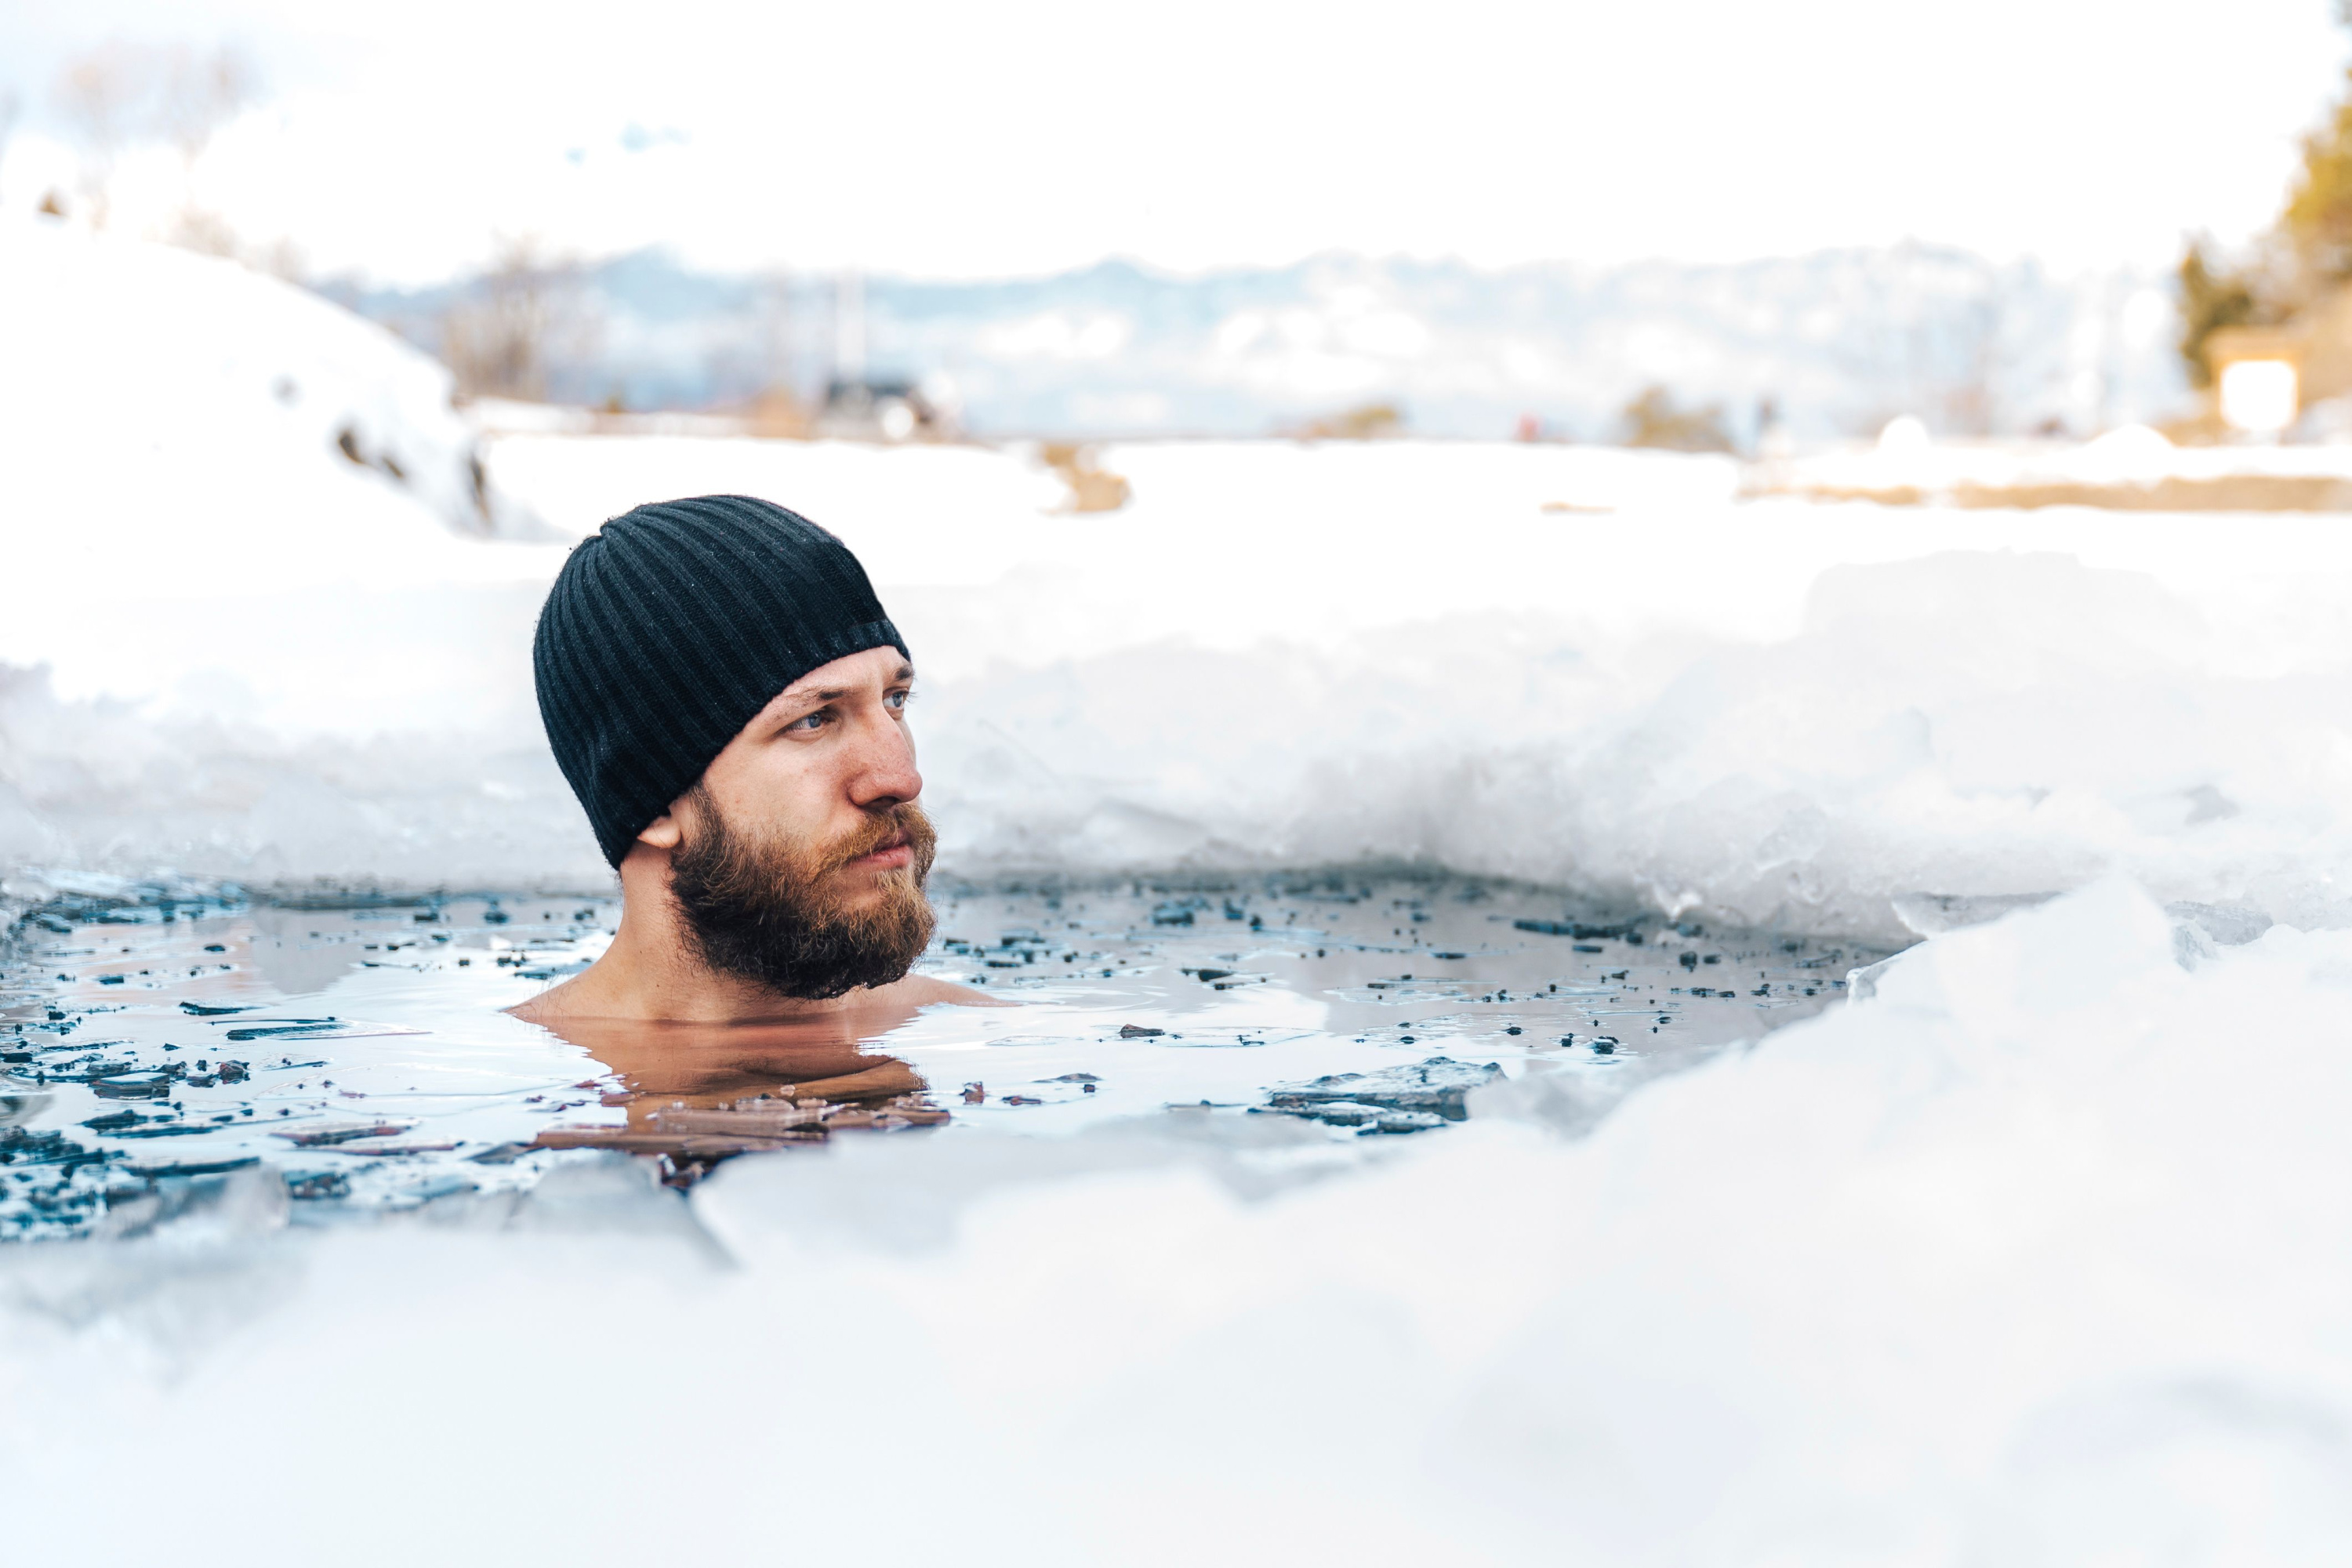 Wim Hof on why we should all start taking cold showers